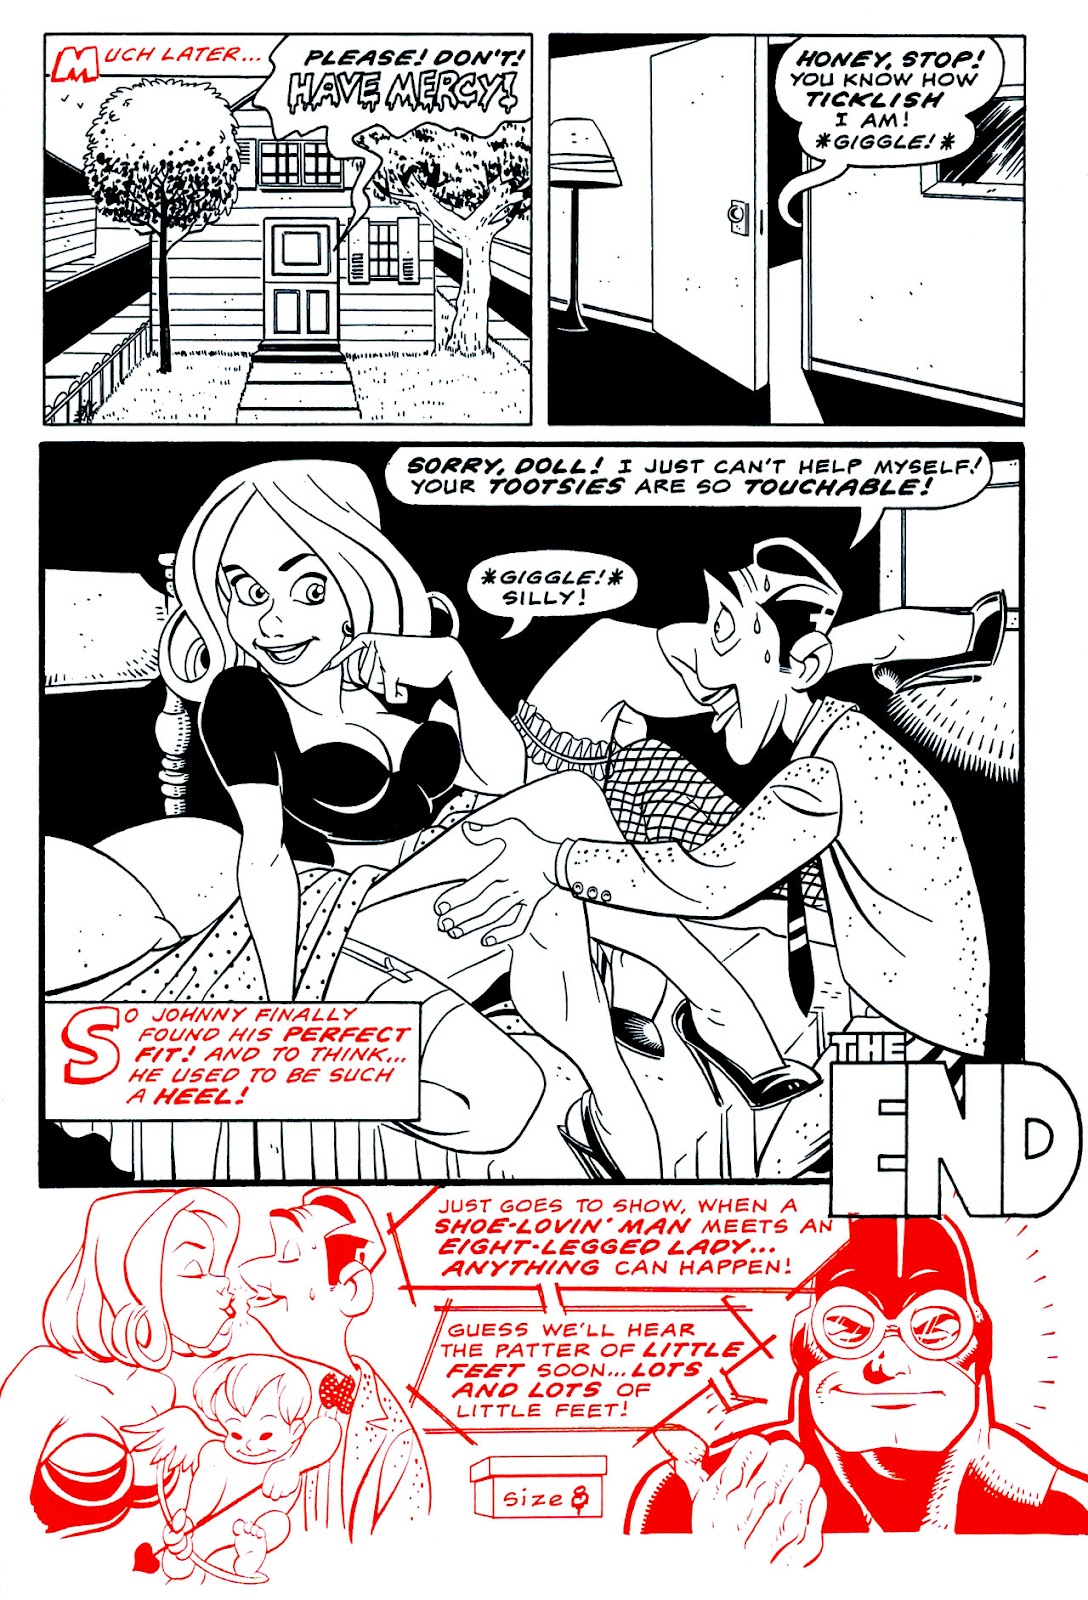 Mr. Monster Presents: (crack-a-boom) issue 1 - Page 35